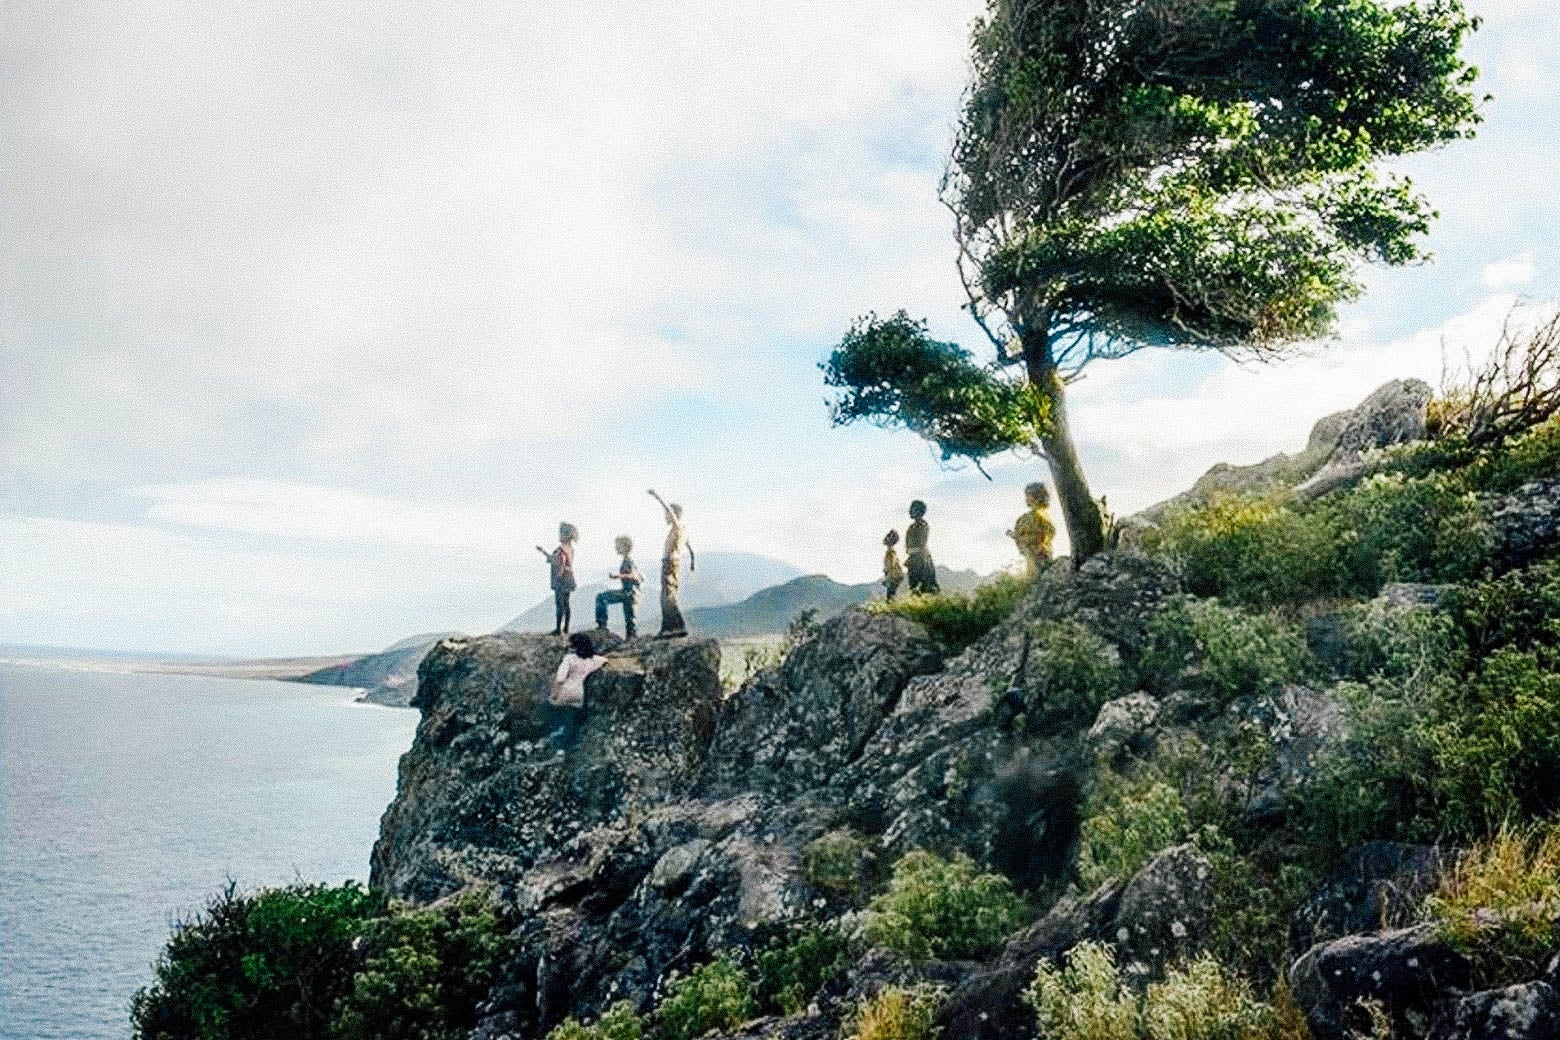 A scene from Wendy, in which a group of kids stand on a foliage-heavy cliff overlooking a body of water